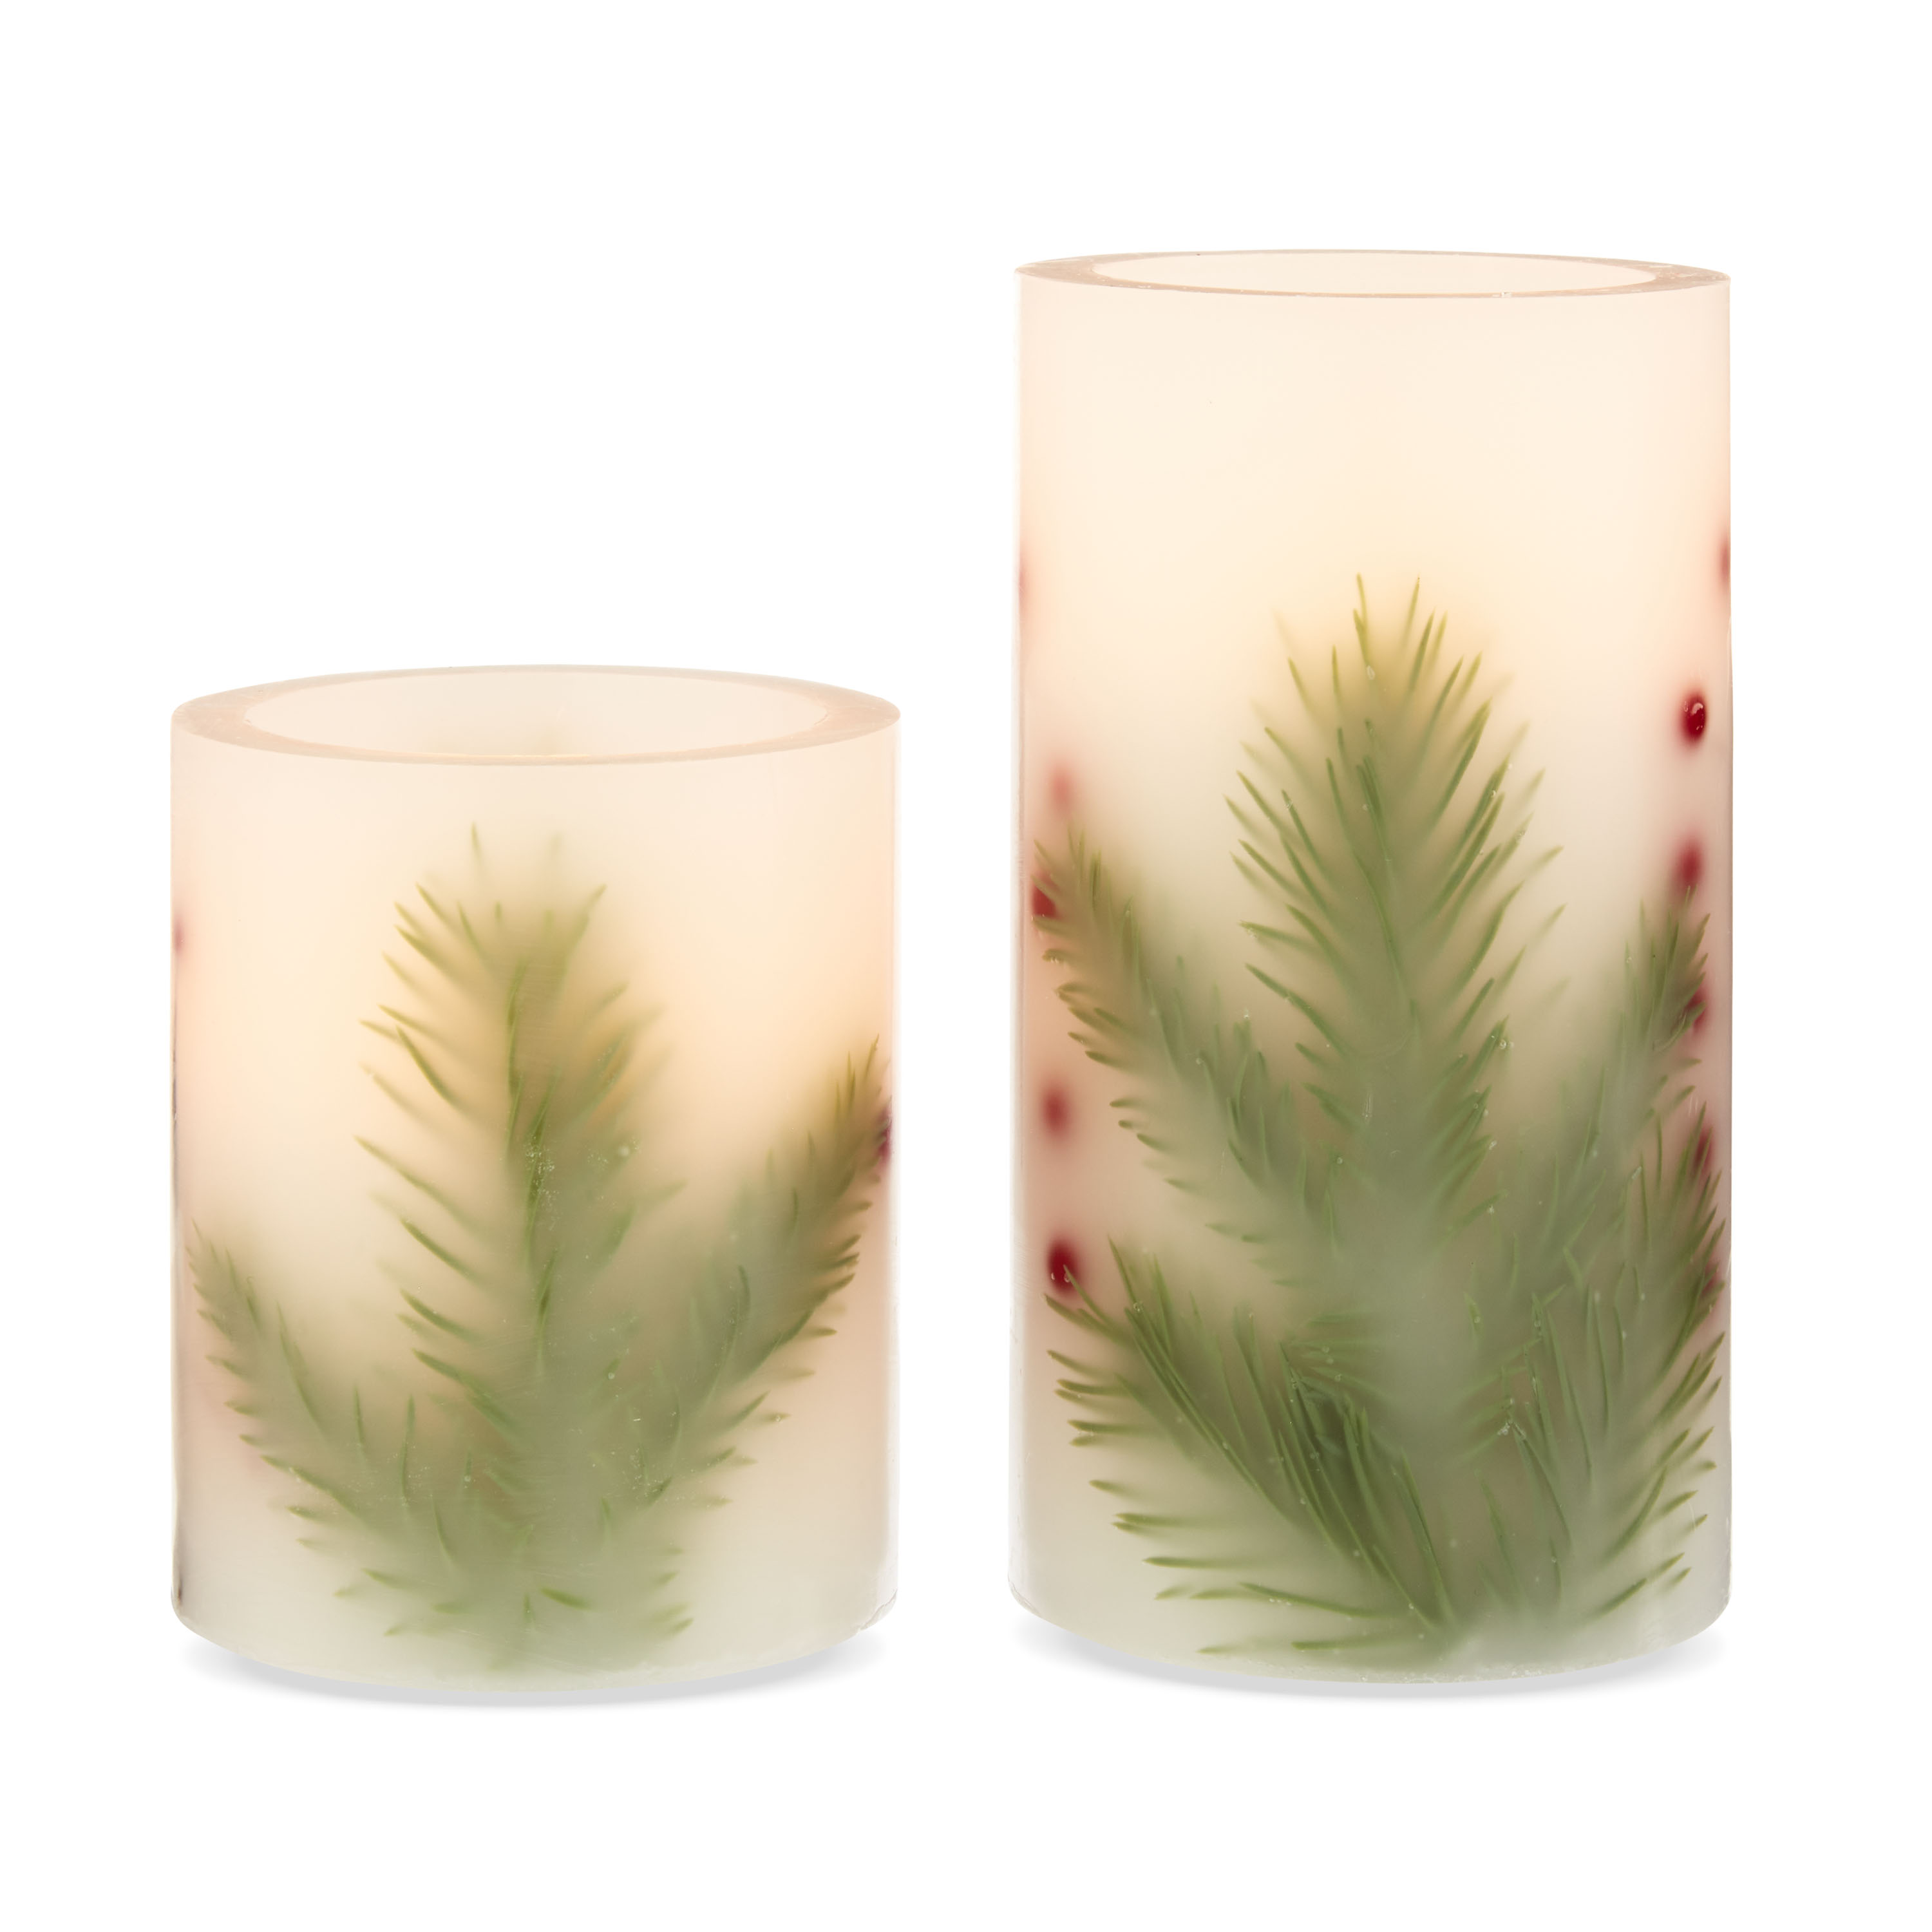 Holiday Time 3.25x4 and 3.25x6 inch Led Flameless Pillar Candles, White Unscented Wax with Red Berry&Evergreen ,Warm White Light,Set Pack - image 2 of 5